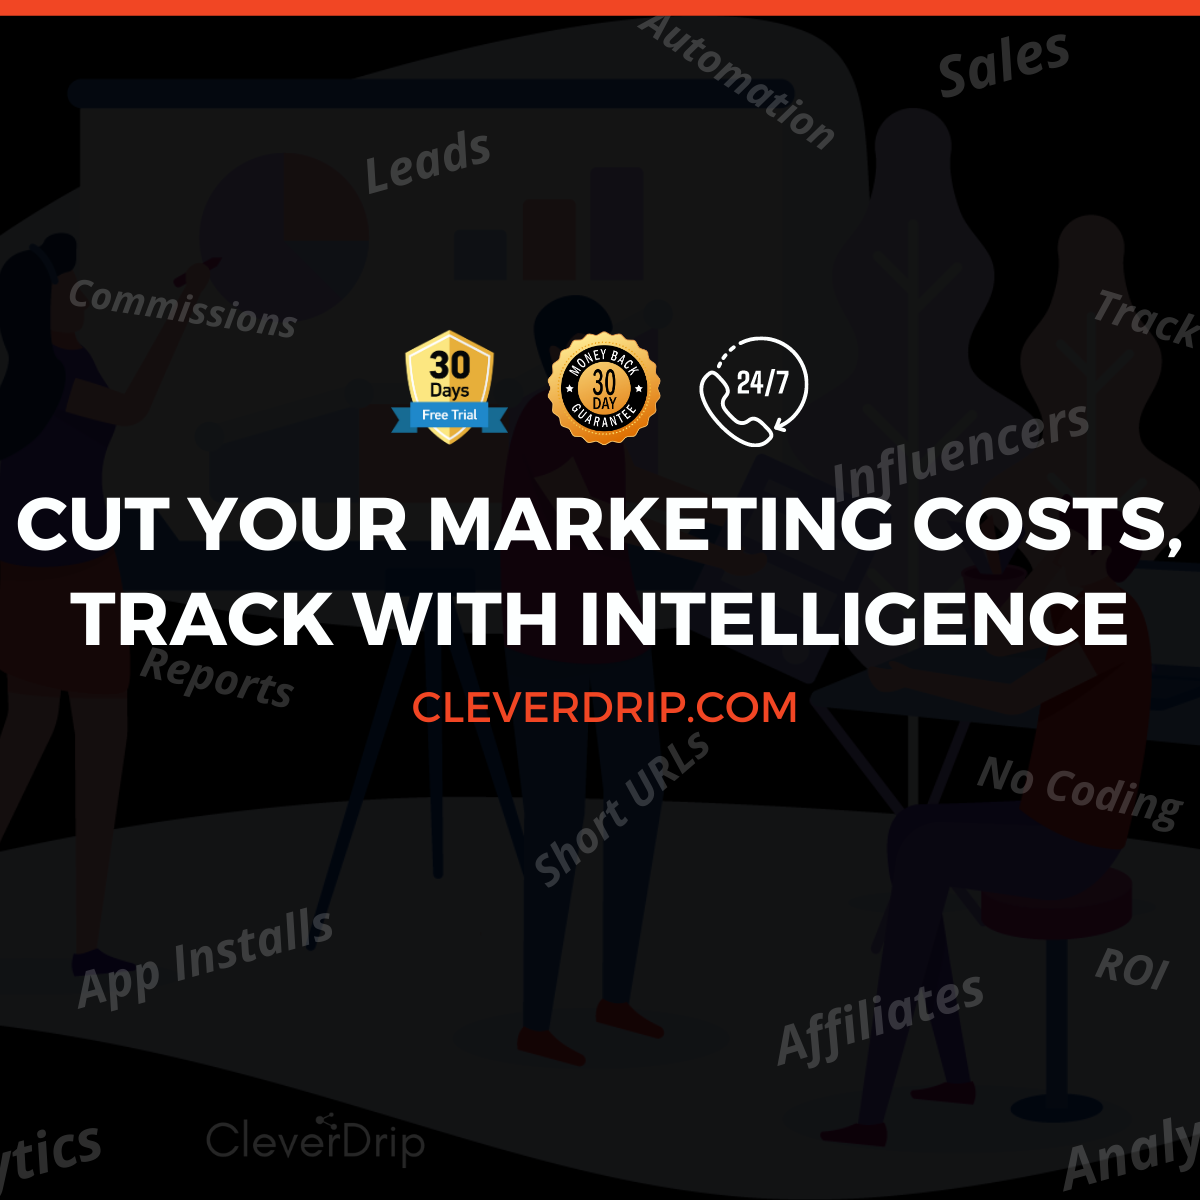 Cut your marketing costs, Pay only for results delivered not for reach & clicks